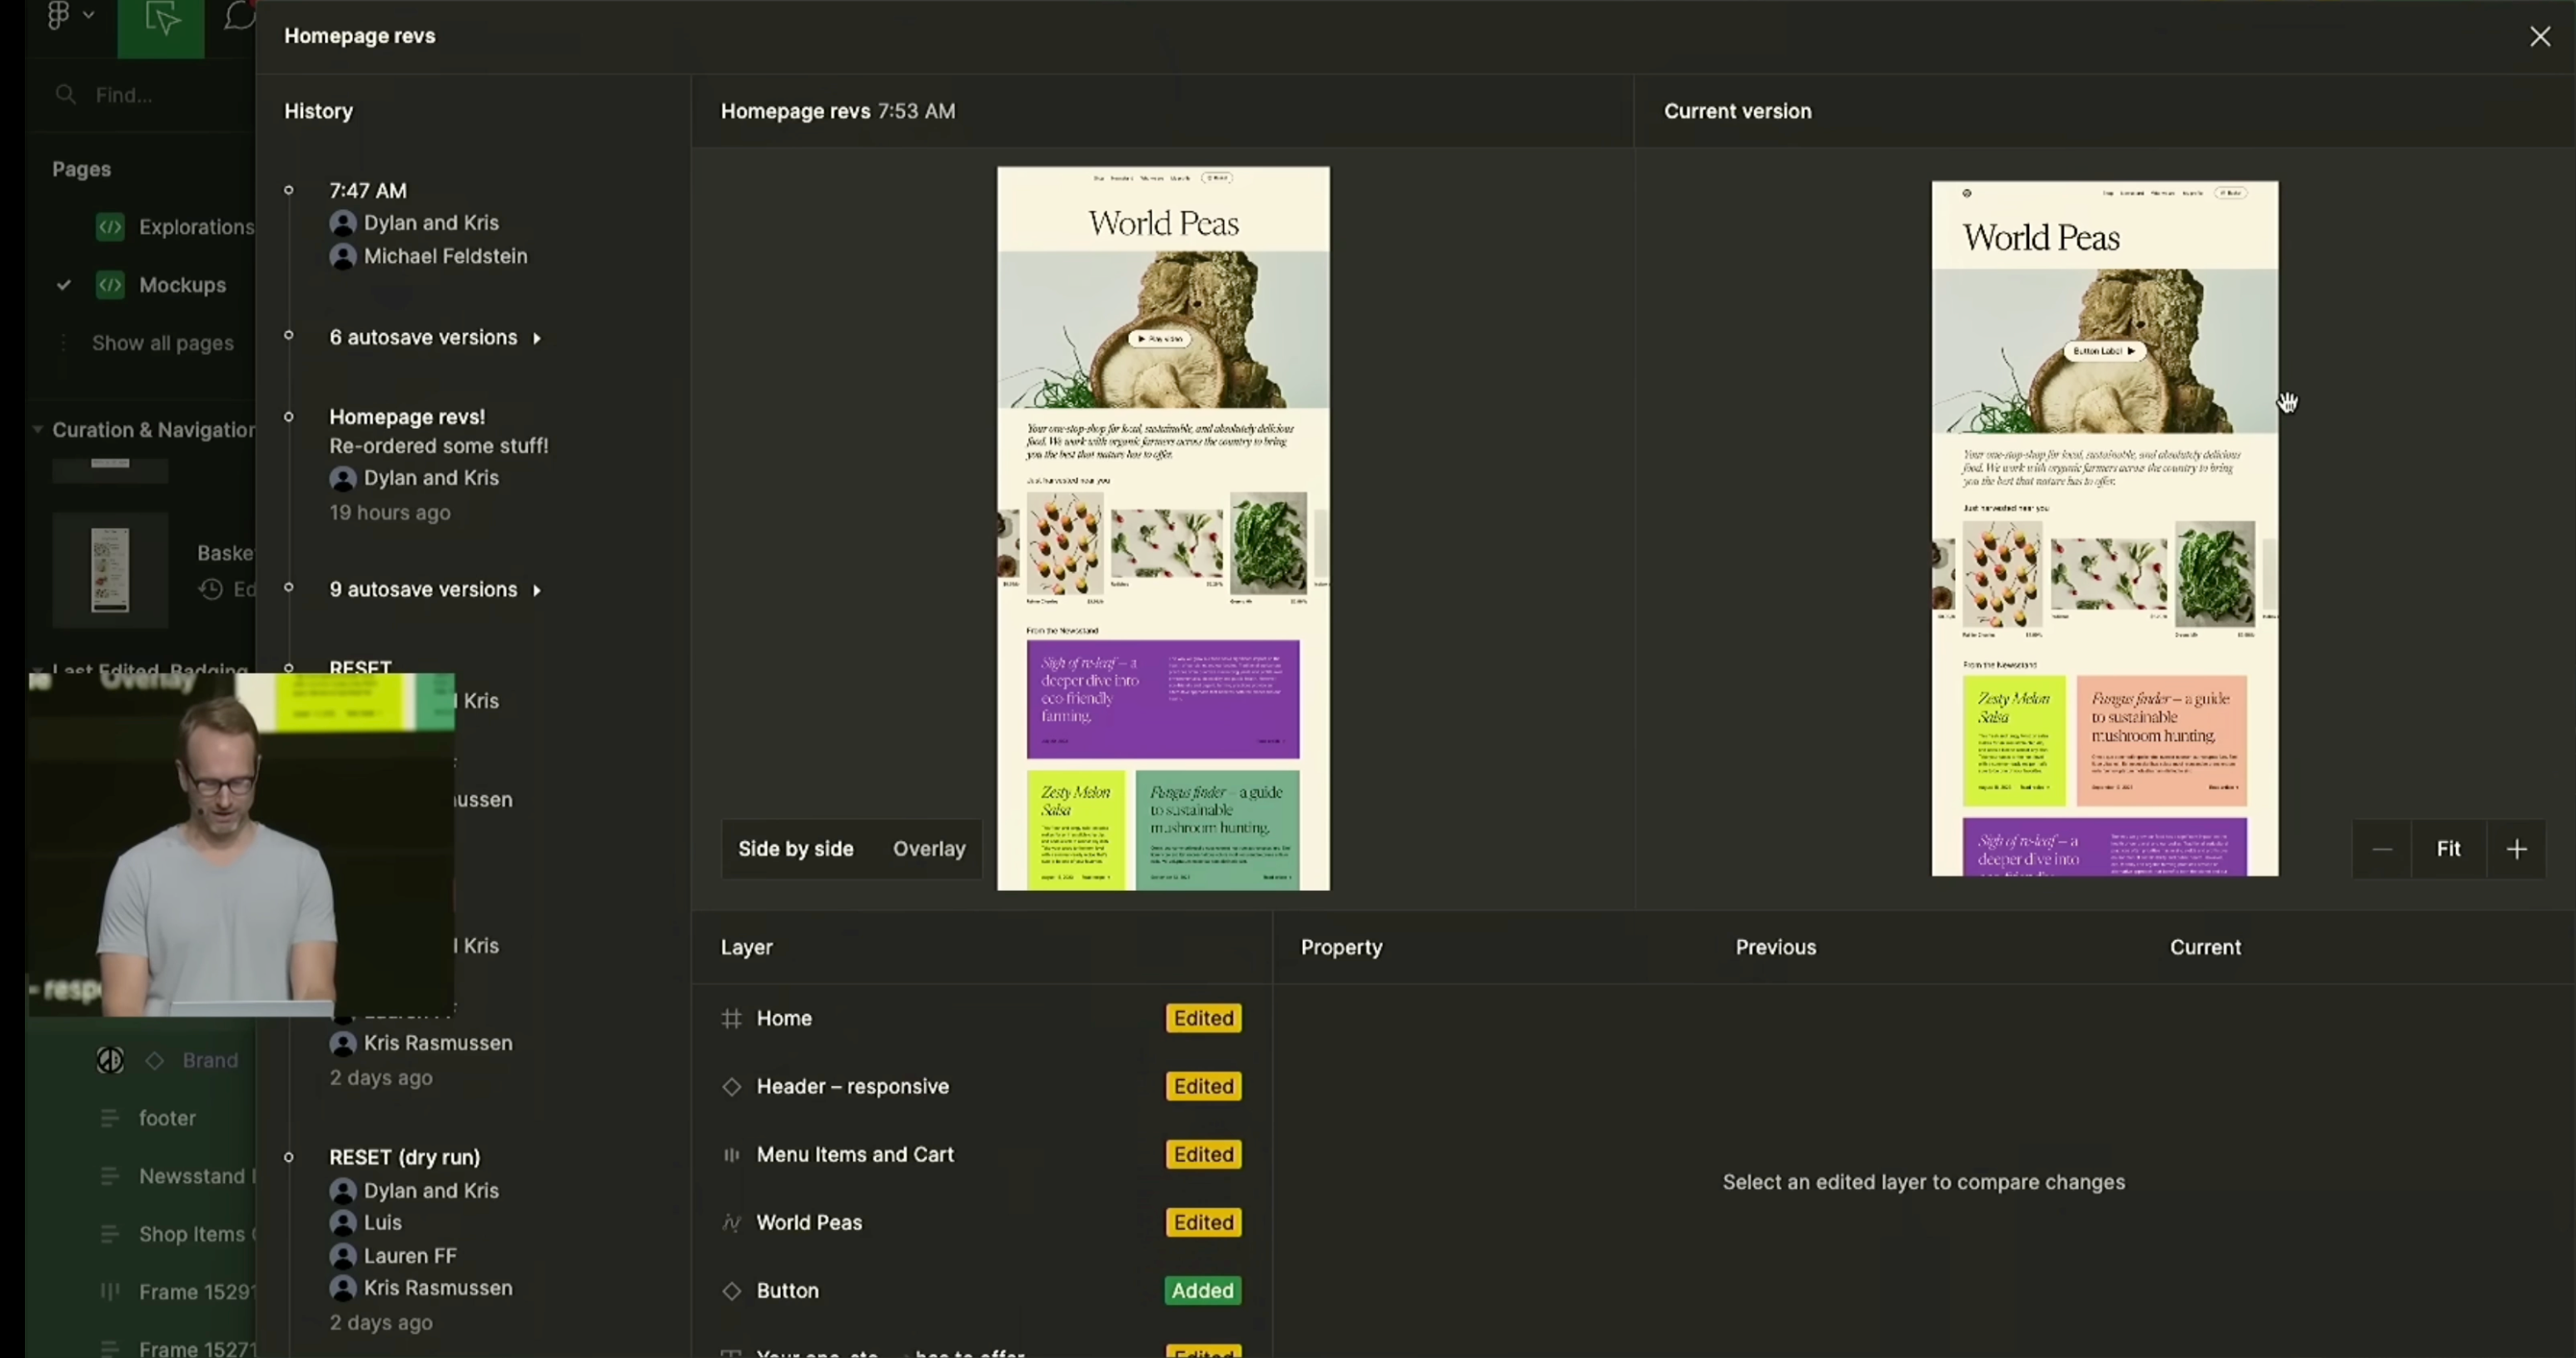 A screenshot from Figma's demo of the new "Compare Changes" feature.